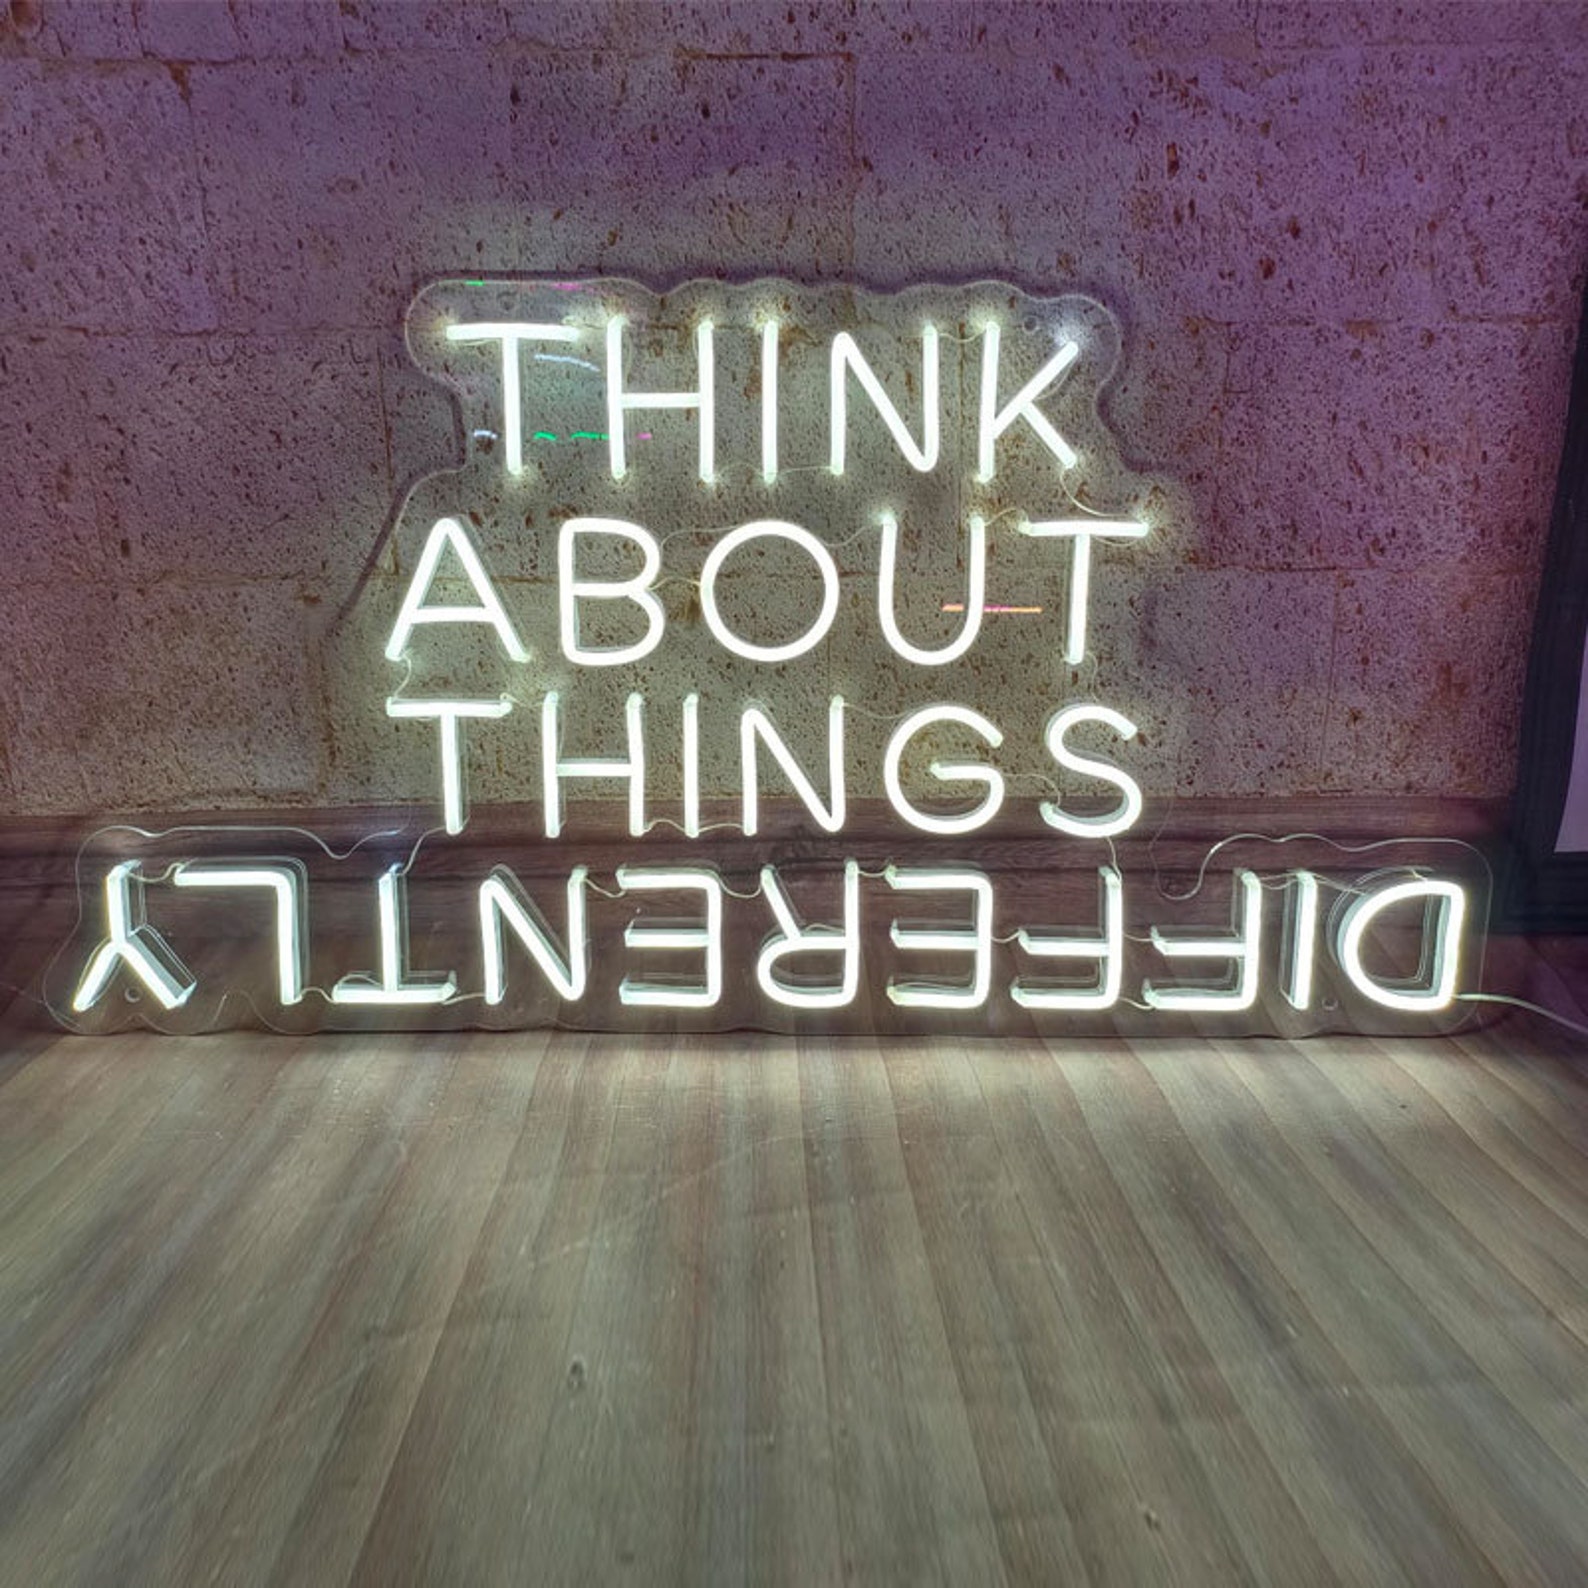 Think About Things Differently Led Neon Living Room Wall Light - Etsy